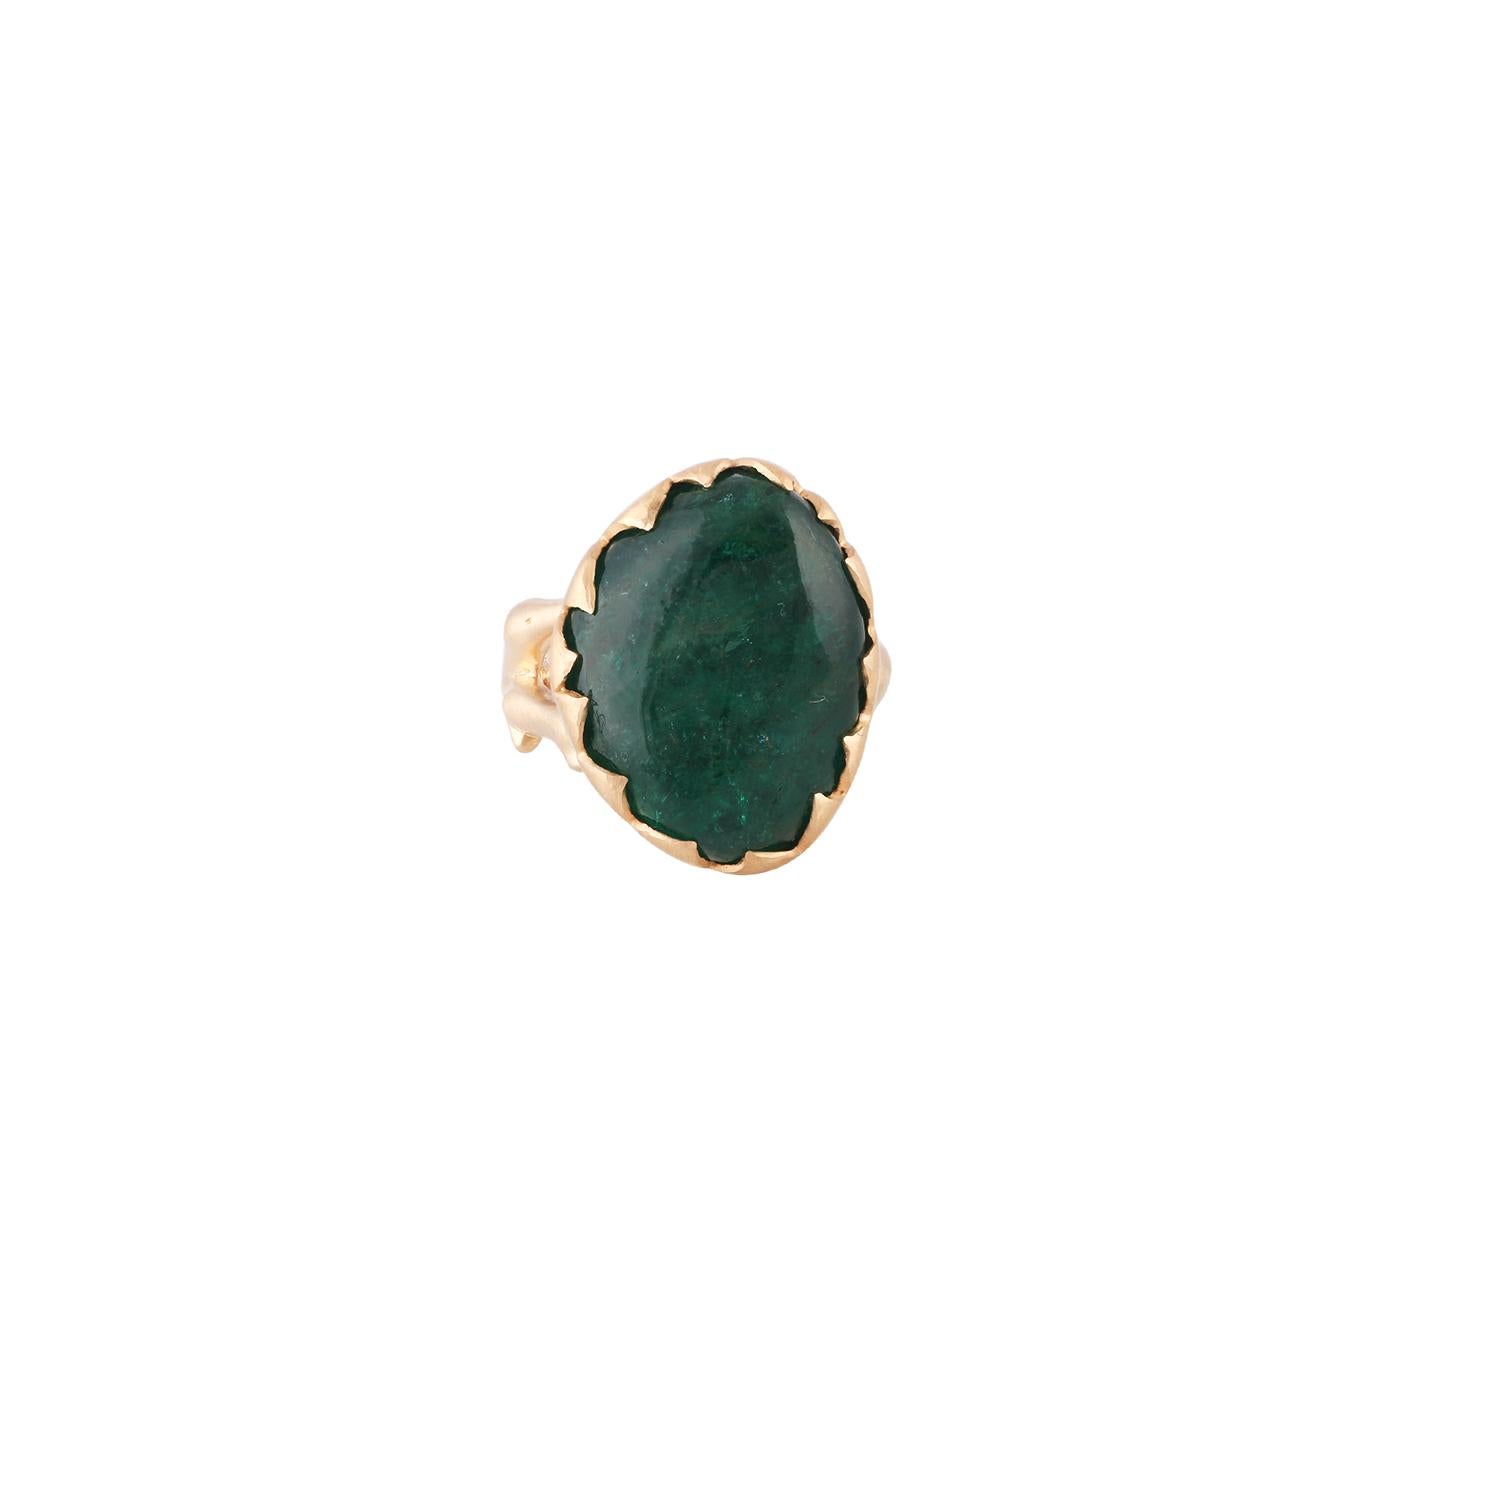 A one of a kind, cabochon Zambian Emerald weighing (17.82 carats) with Diamond 
 Diamond - 0.03 Carat 
Gold 18K Yellow Gold
 

The ring is currently sized at US 5.5
Ring Can be Resized And Ring come Along With Prestation Box.

Please feel free to